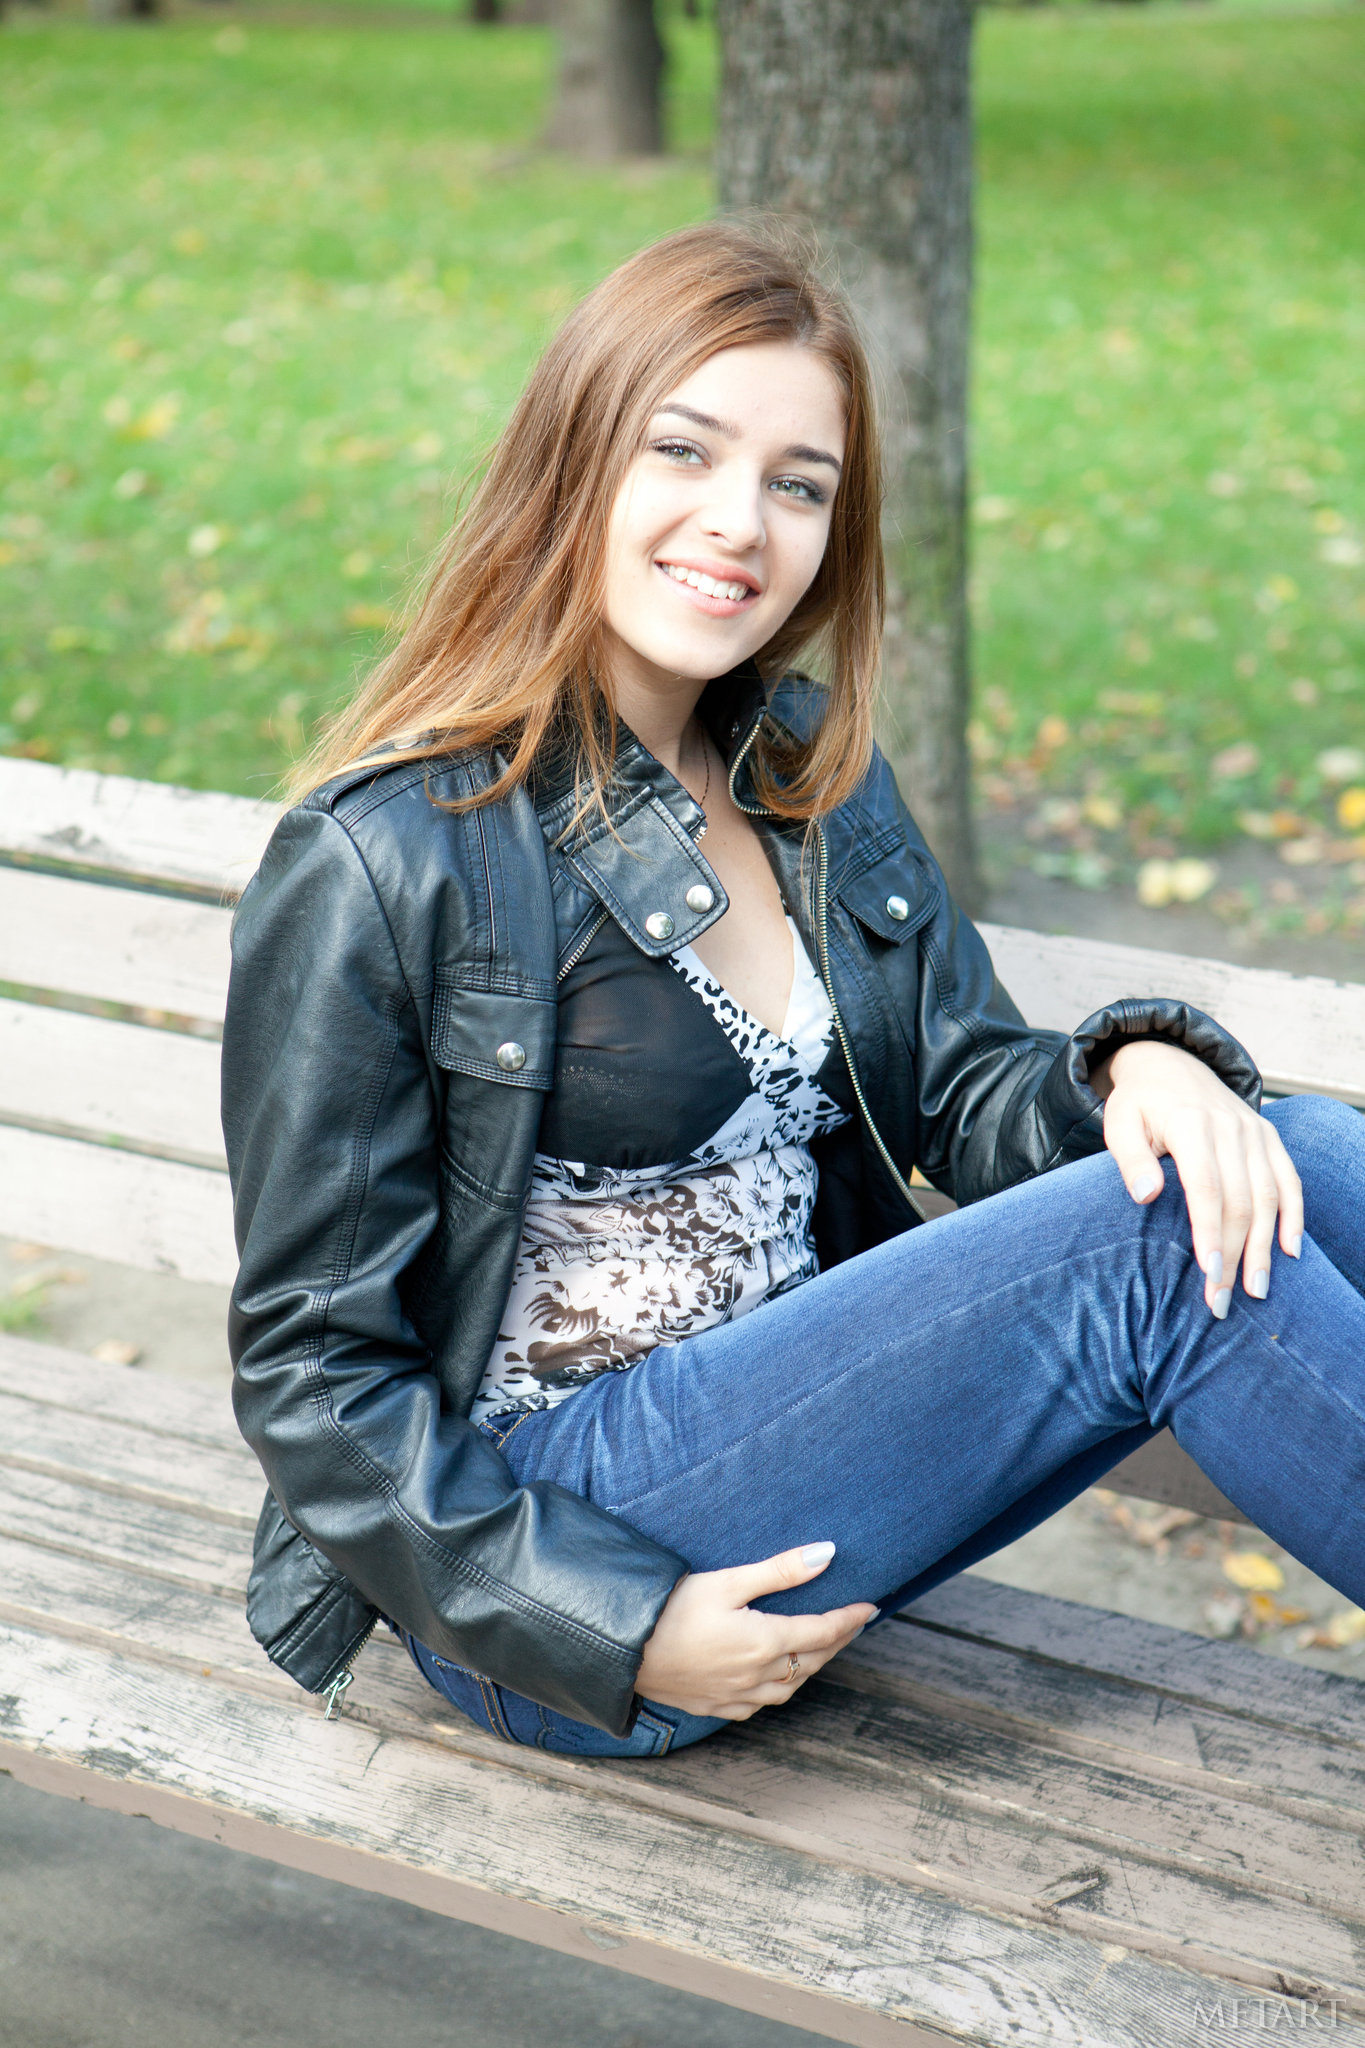 People 1365x2048 Adriana Morriss model women outdoors looking at viewer leather jacket bench sitting brunette smiling long hair black jackets MetArt happy pale open jacket jacket on bench blue  jeans blue pants women portrait display